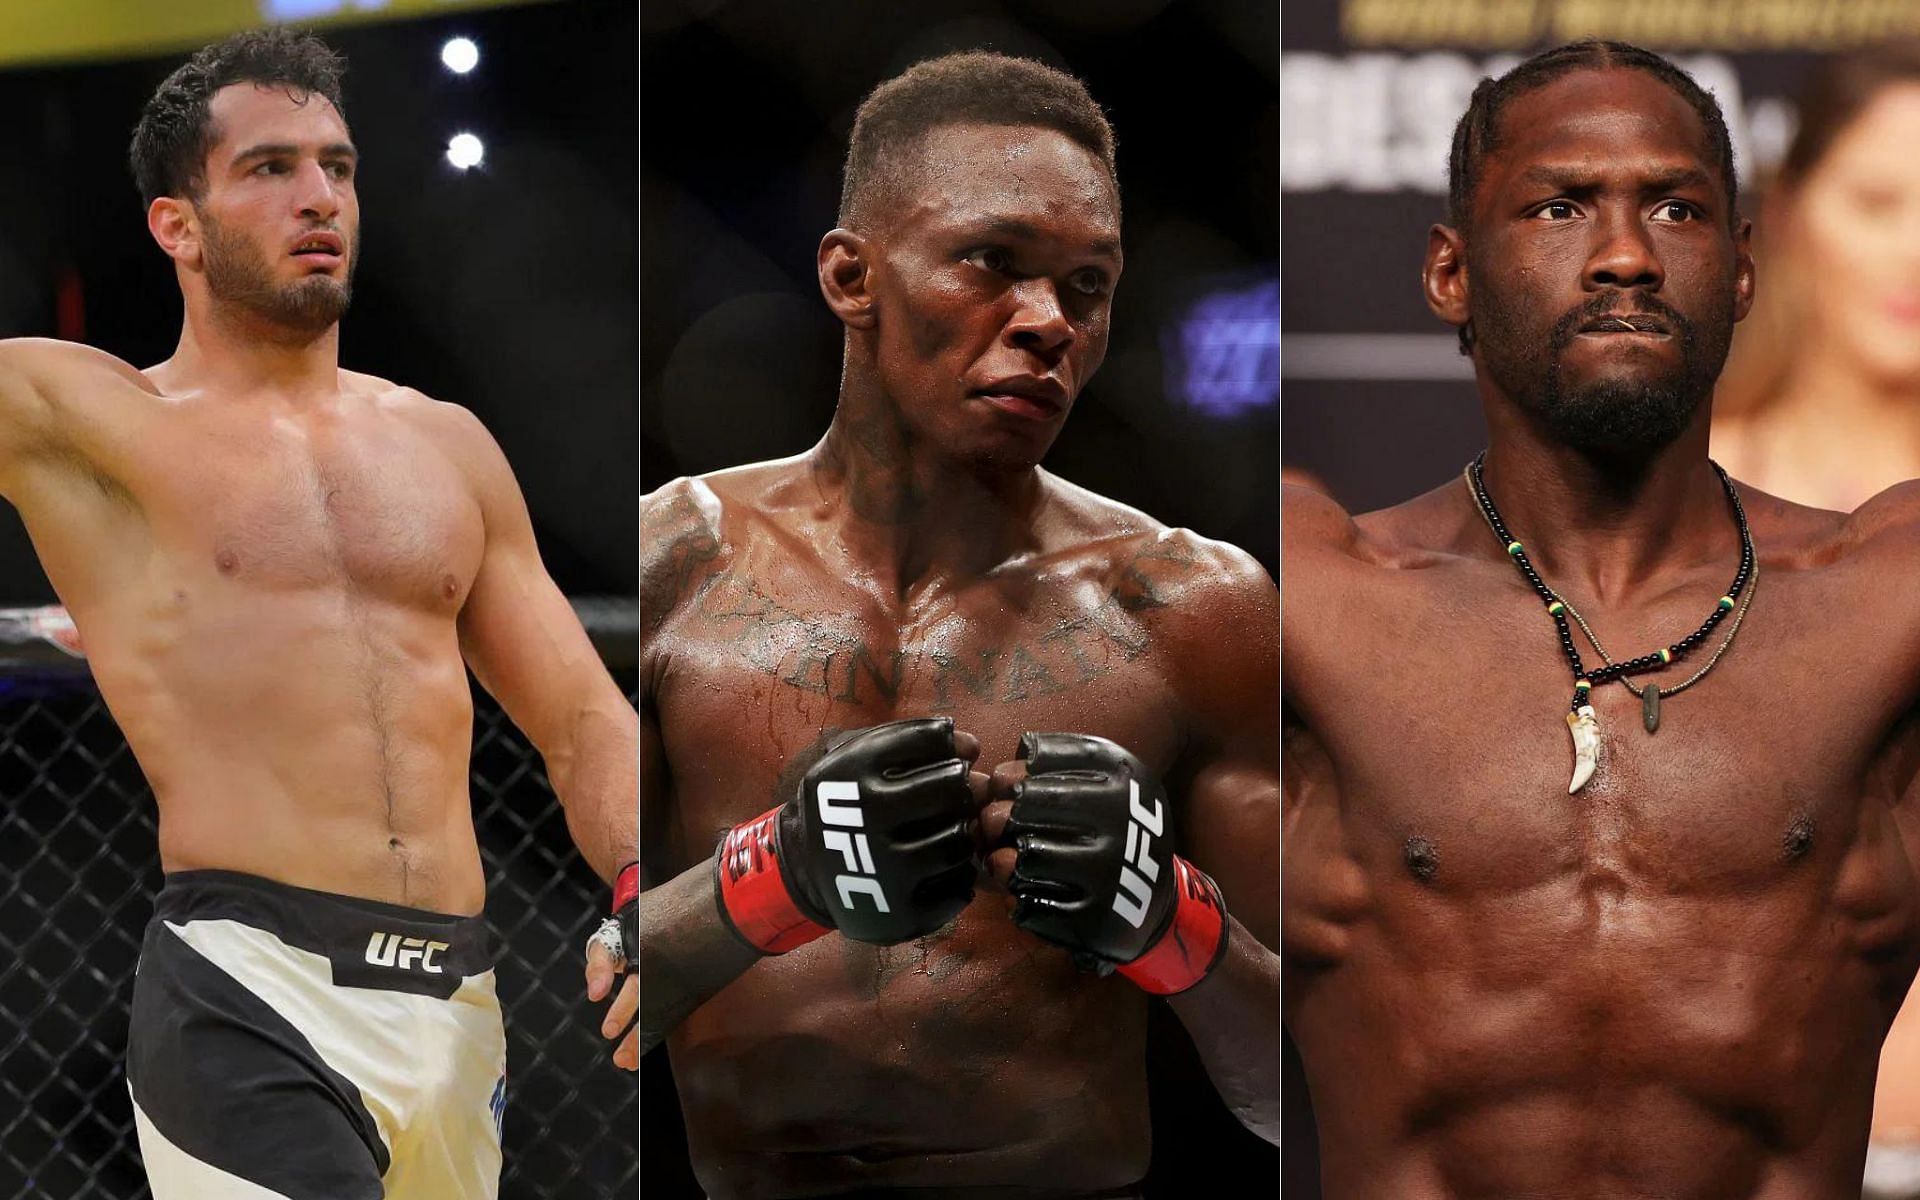 Gegard Mousasi (left), Israel Adesanya (center), and Jared Cannonier (right)